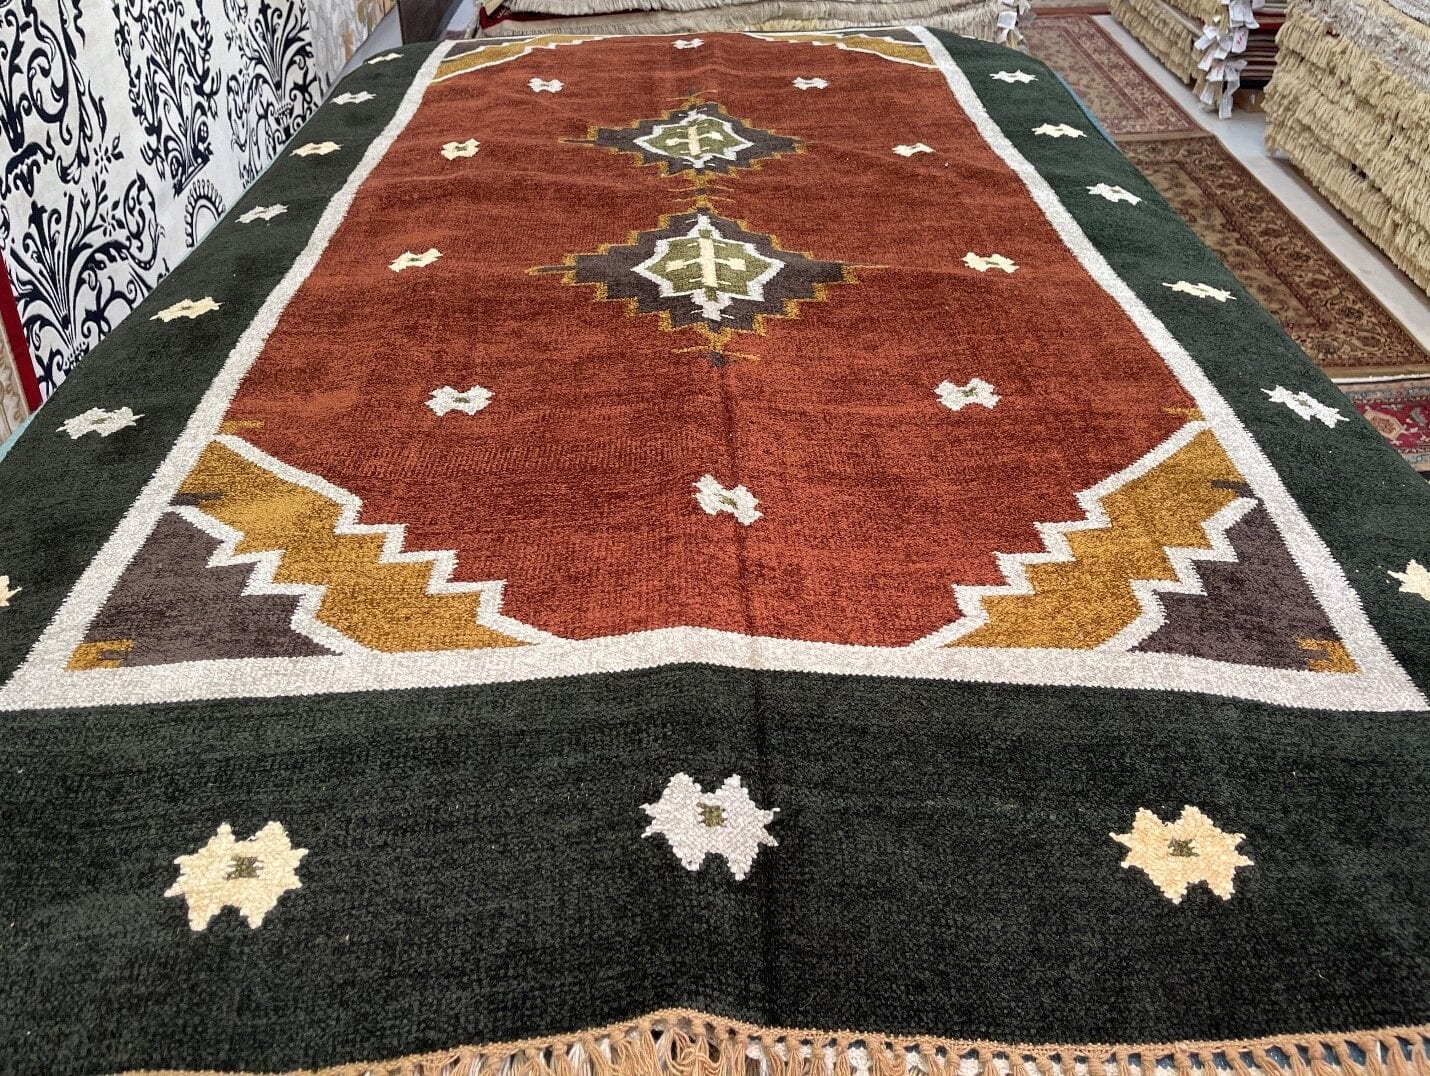 Cleaning wood rugs